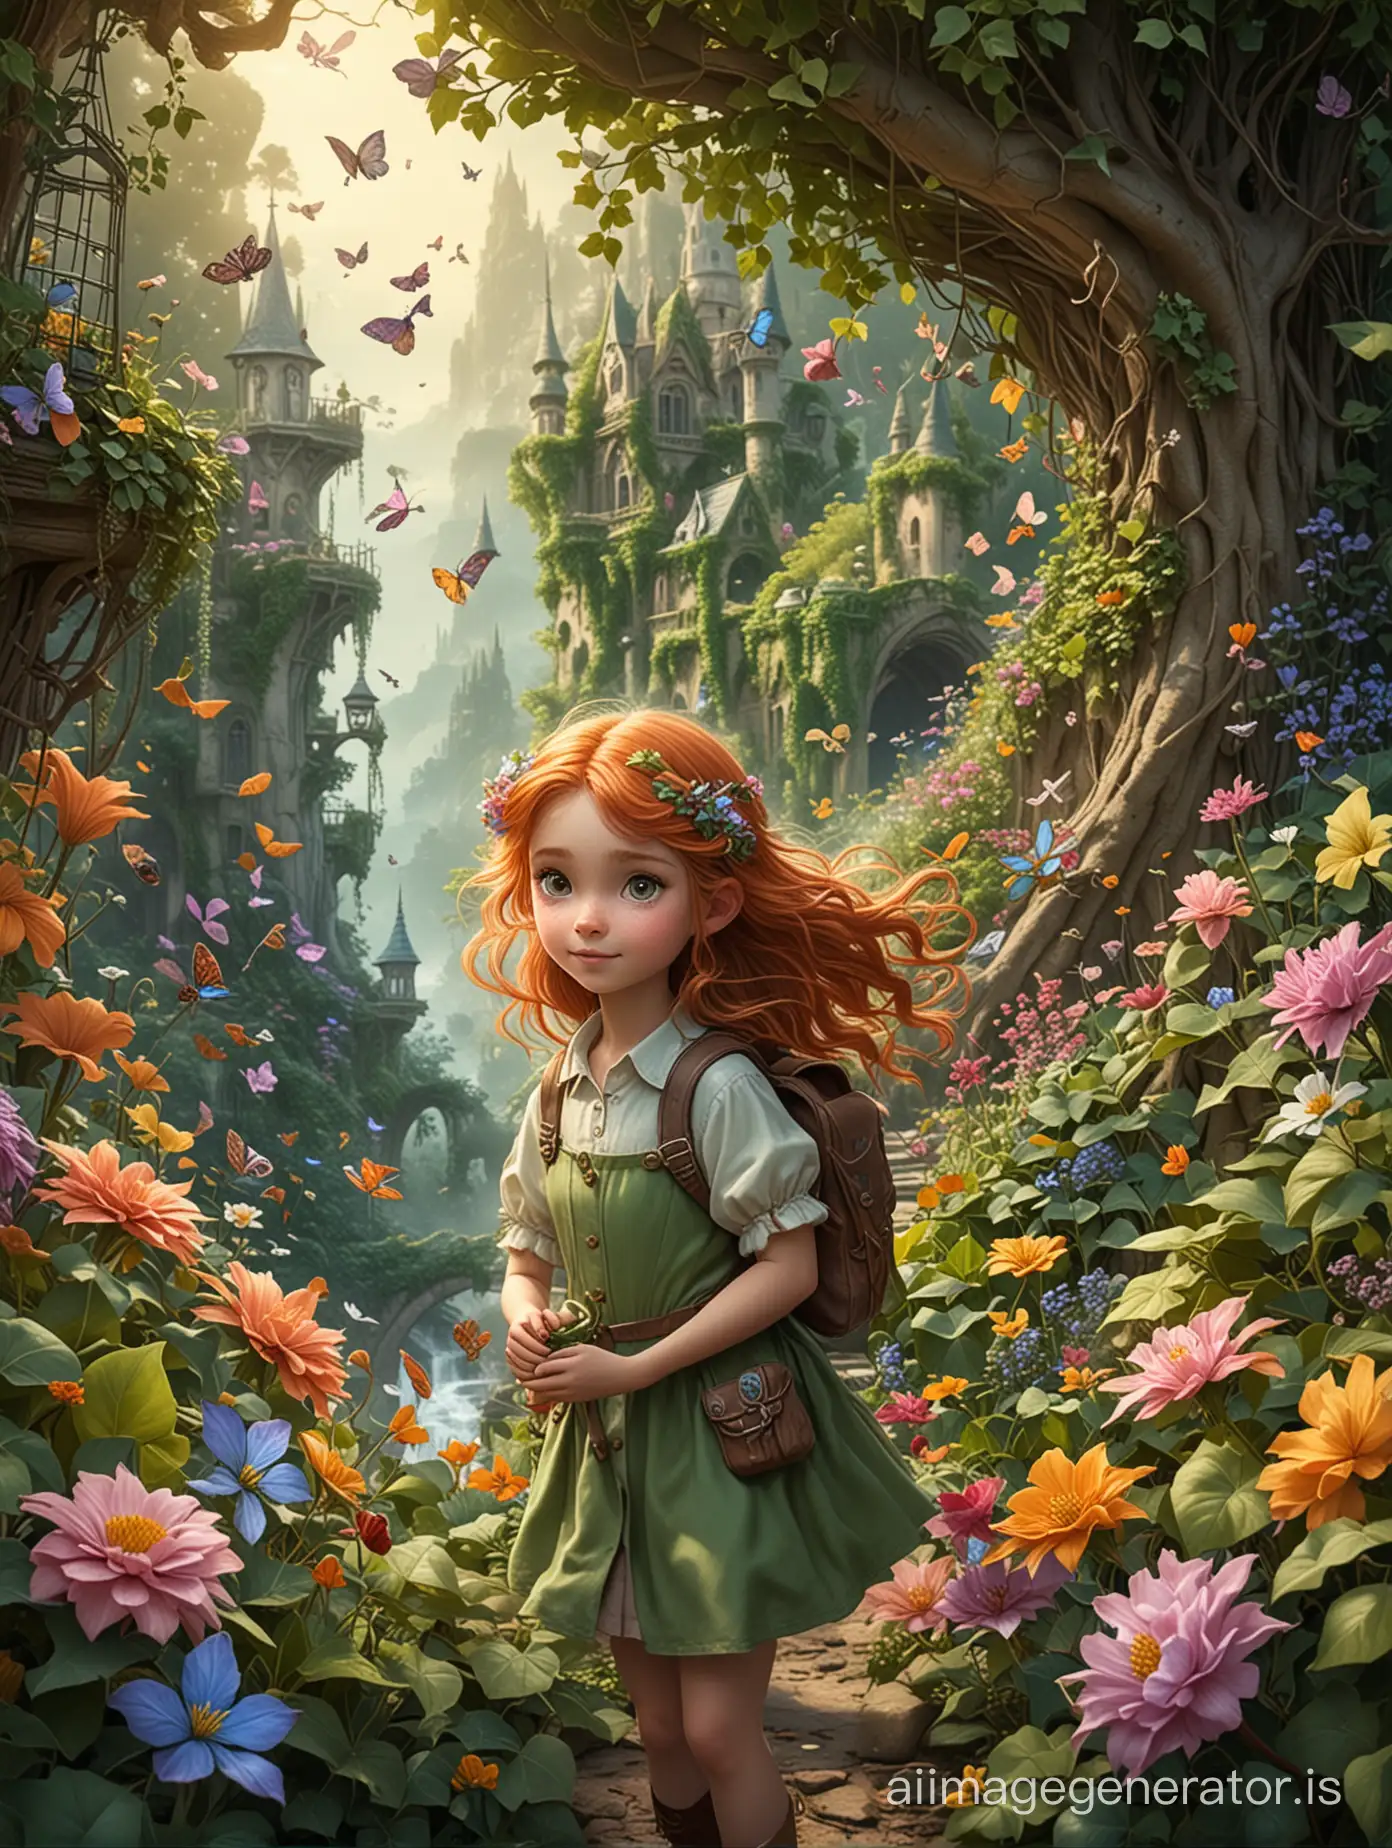 Young-Adventurer-Ivy-in-a-Magical-Wonderland